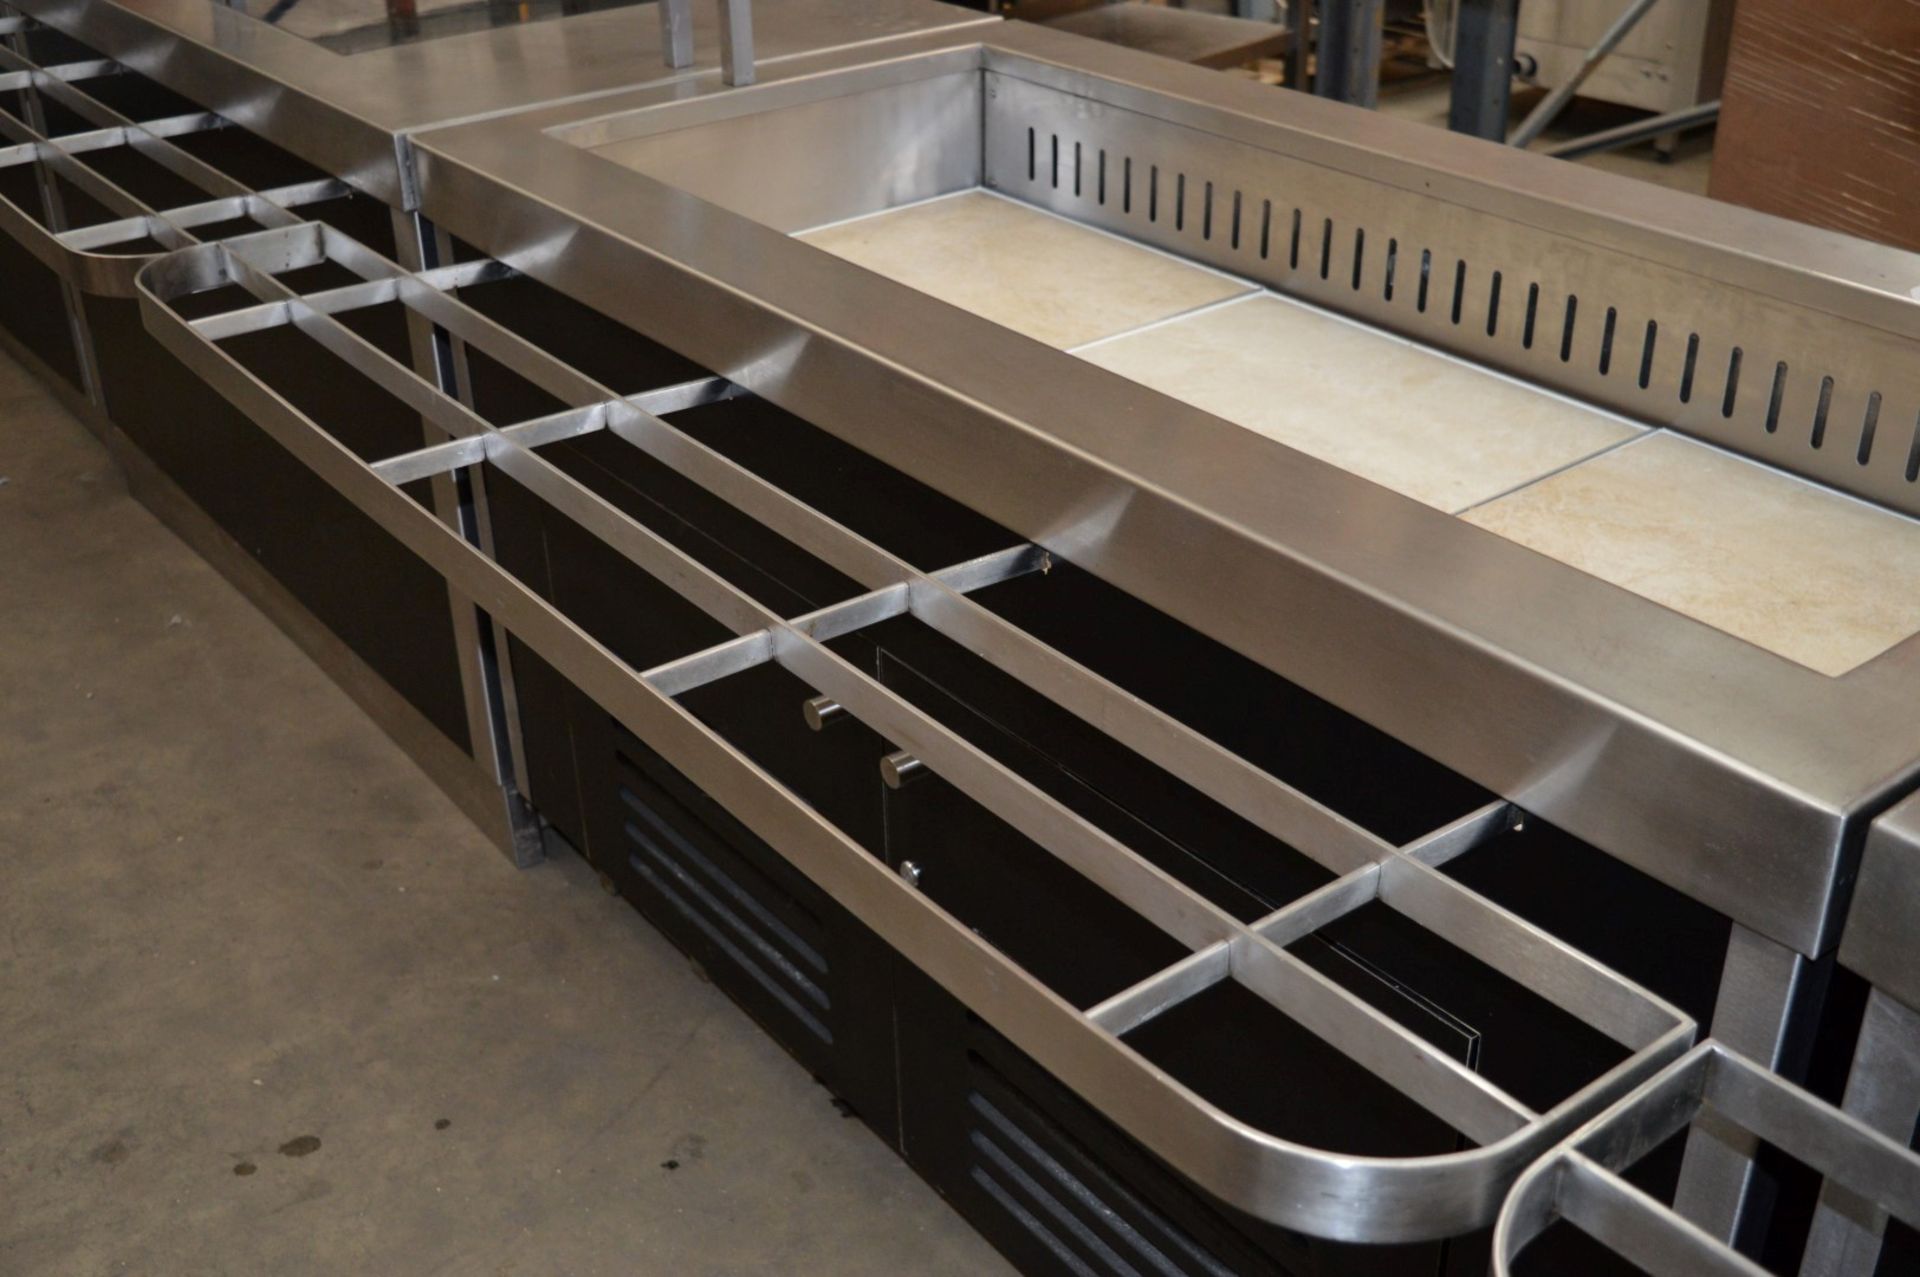 1 x Heated Well Bain Marie Serving Counter - On Castors For Maneuverability - Ideal For Pub Carvery, - Image 3 of 7